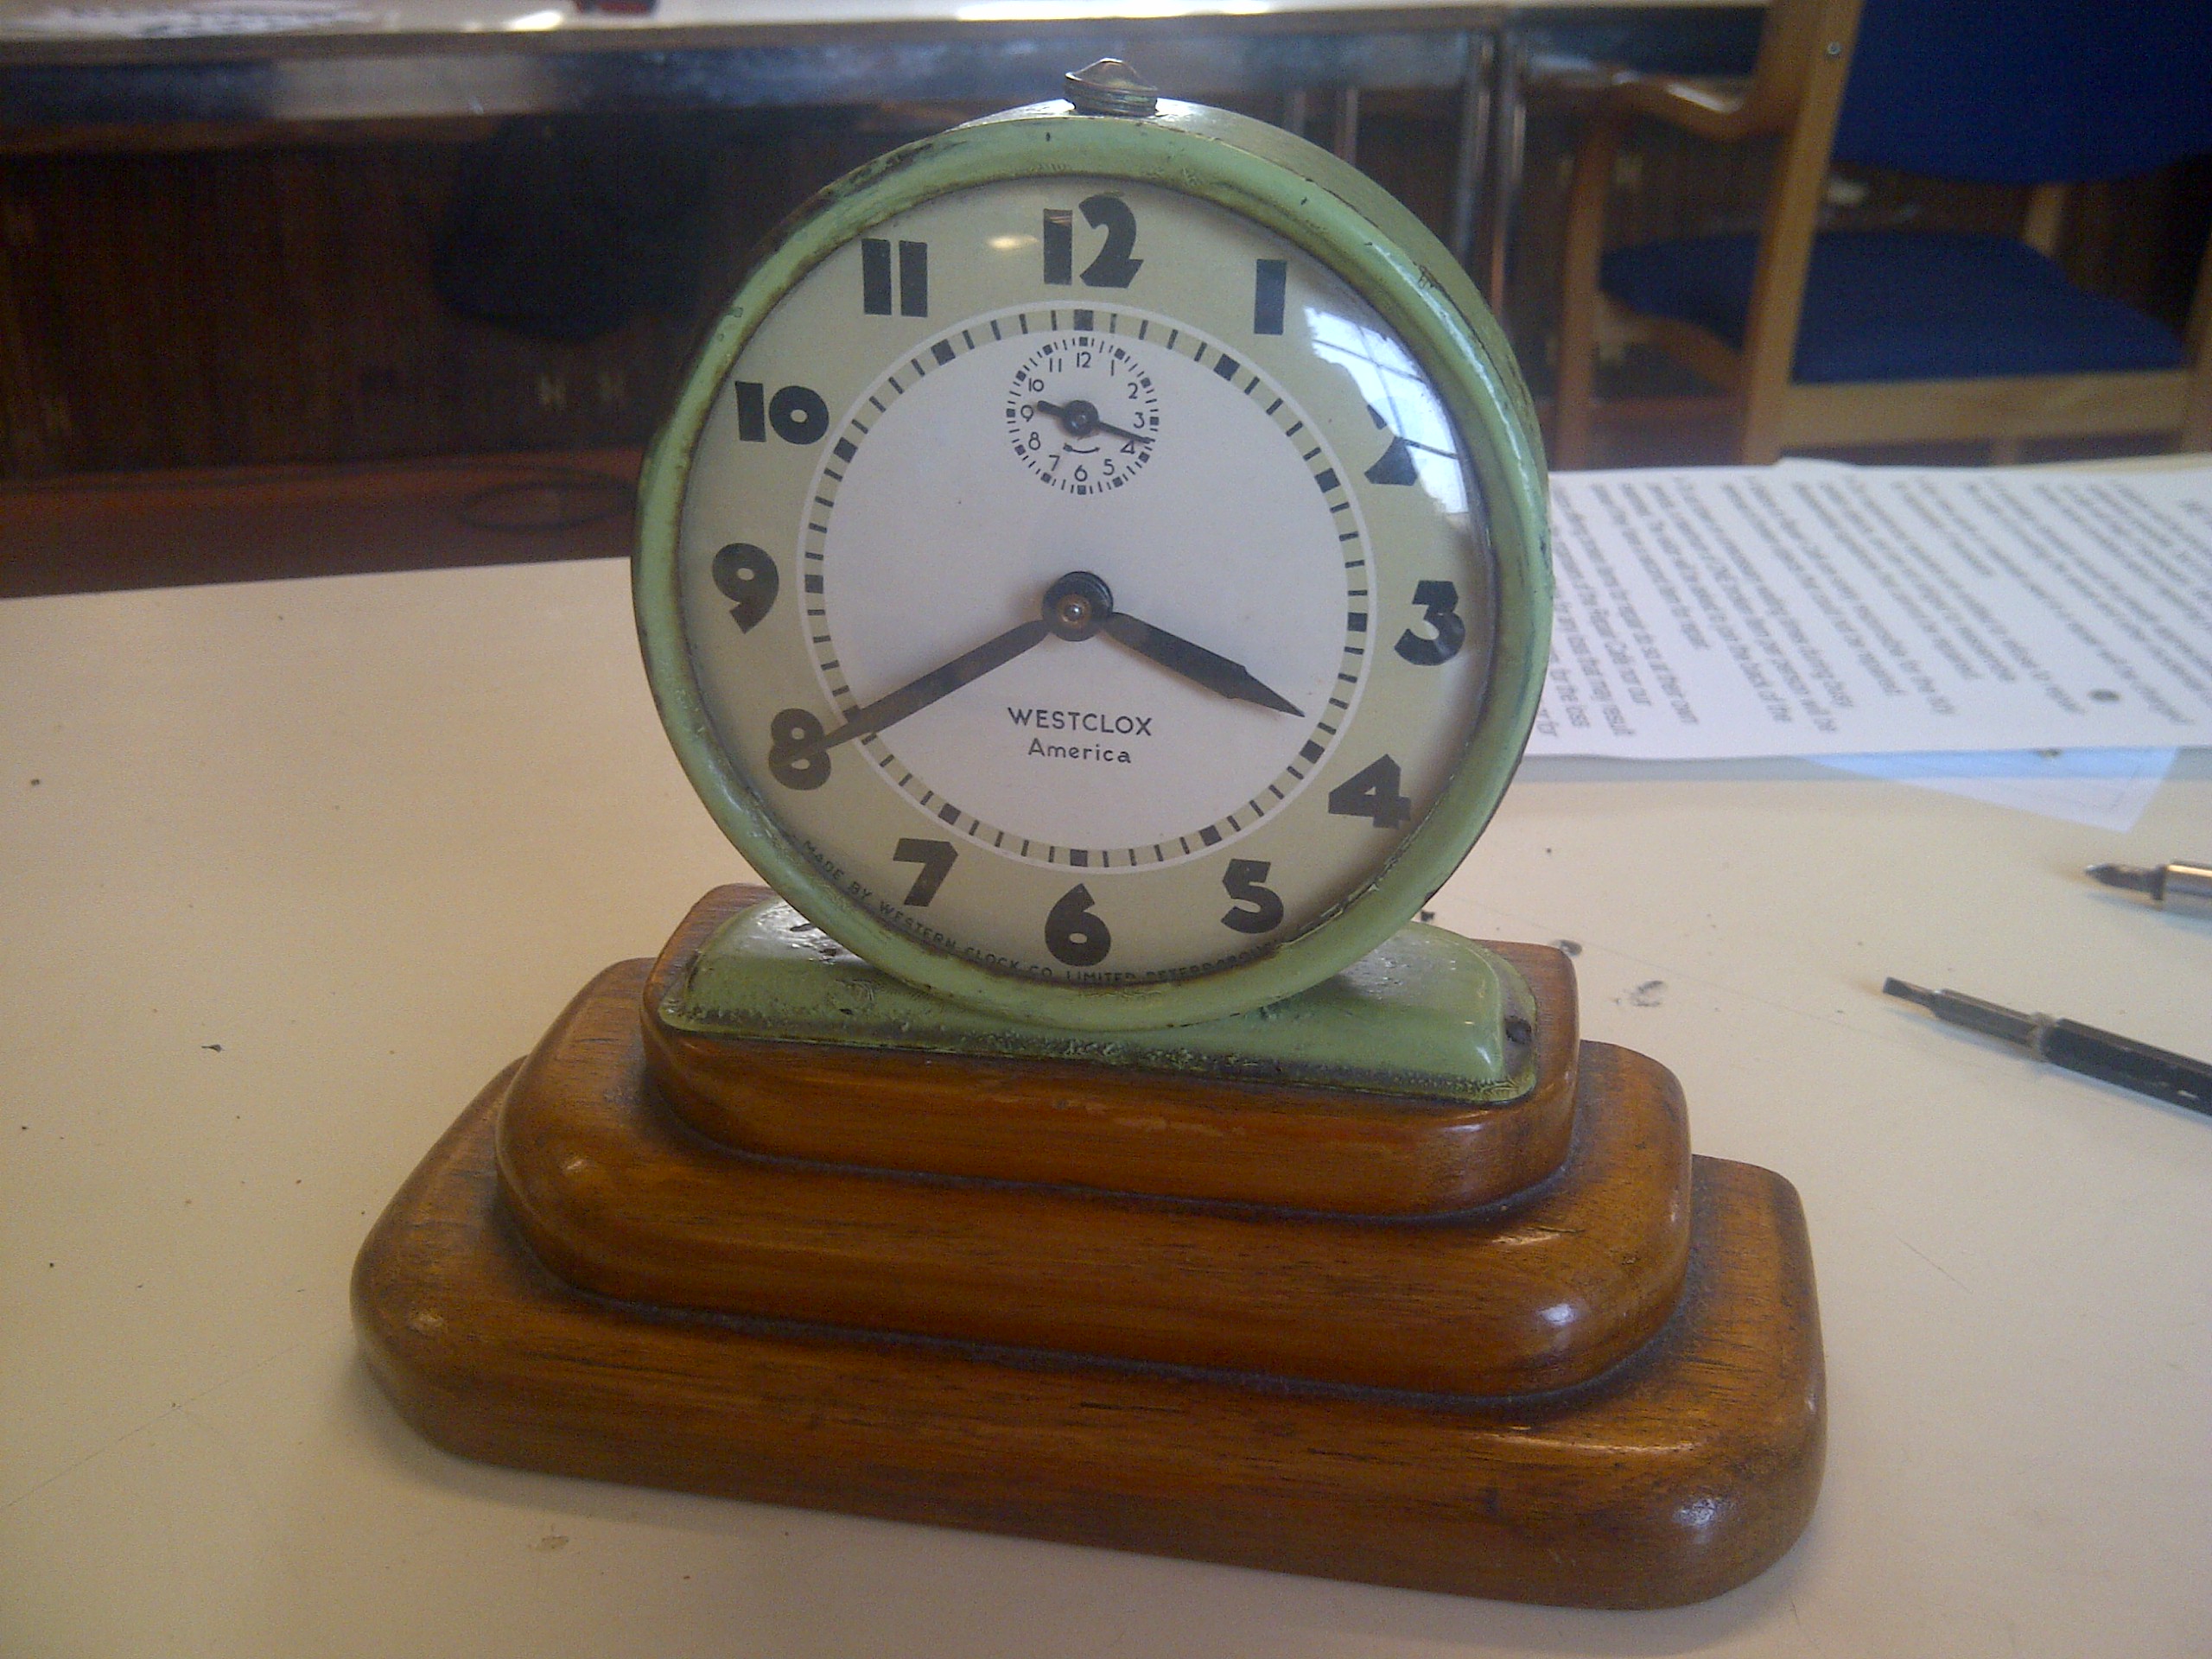 This vintage alarm clock was successfully got going again.